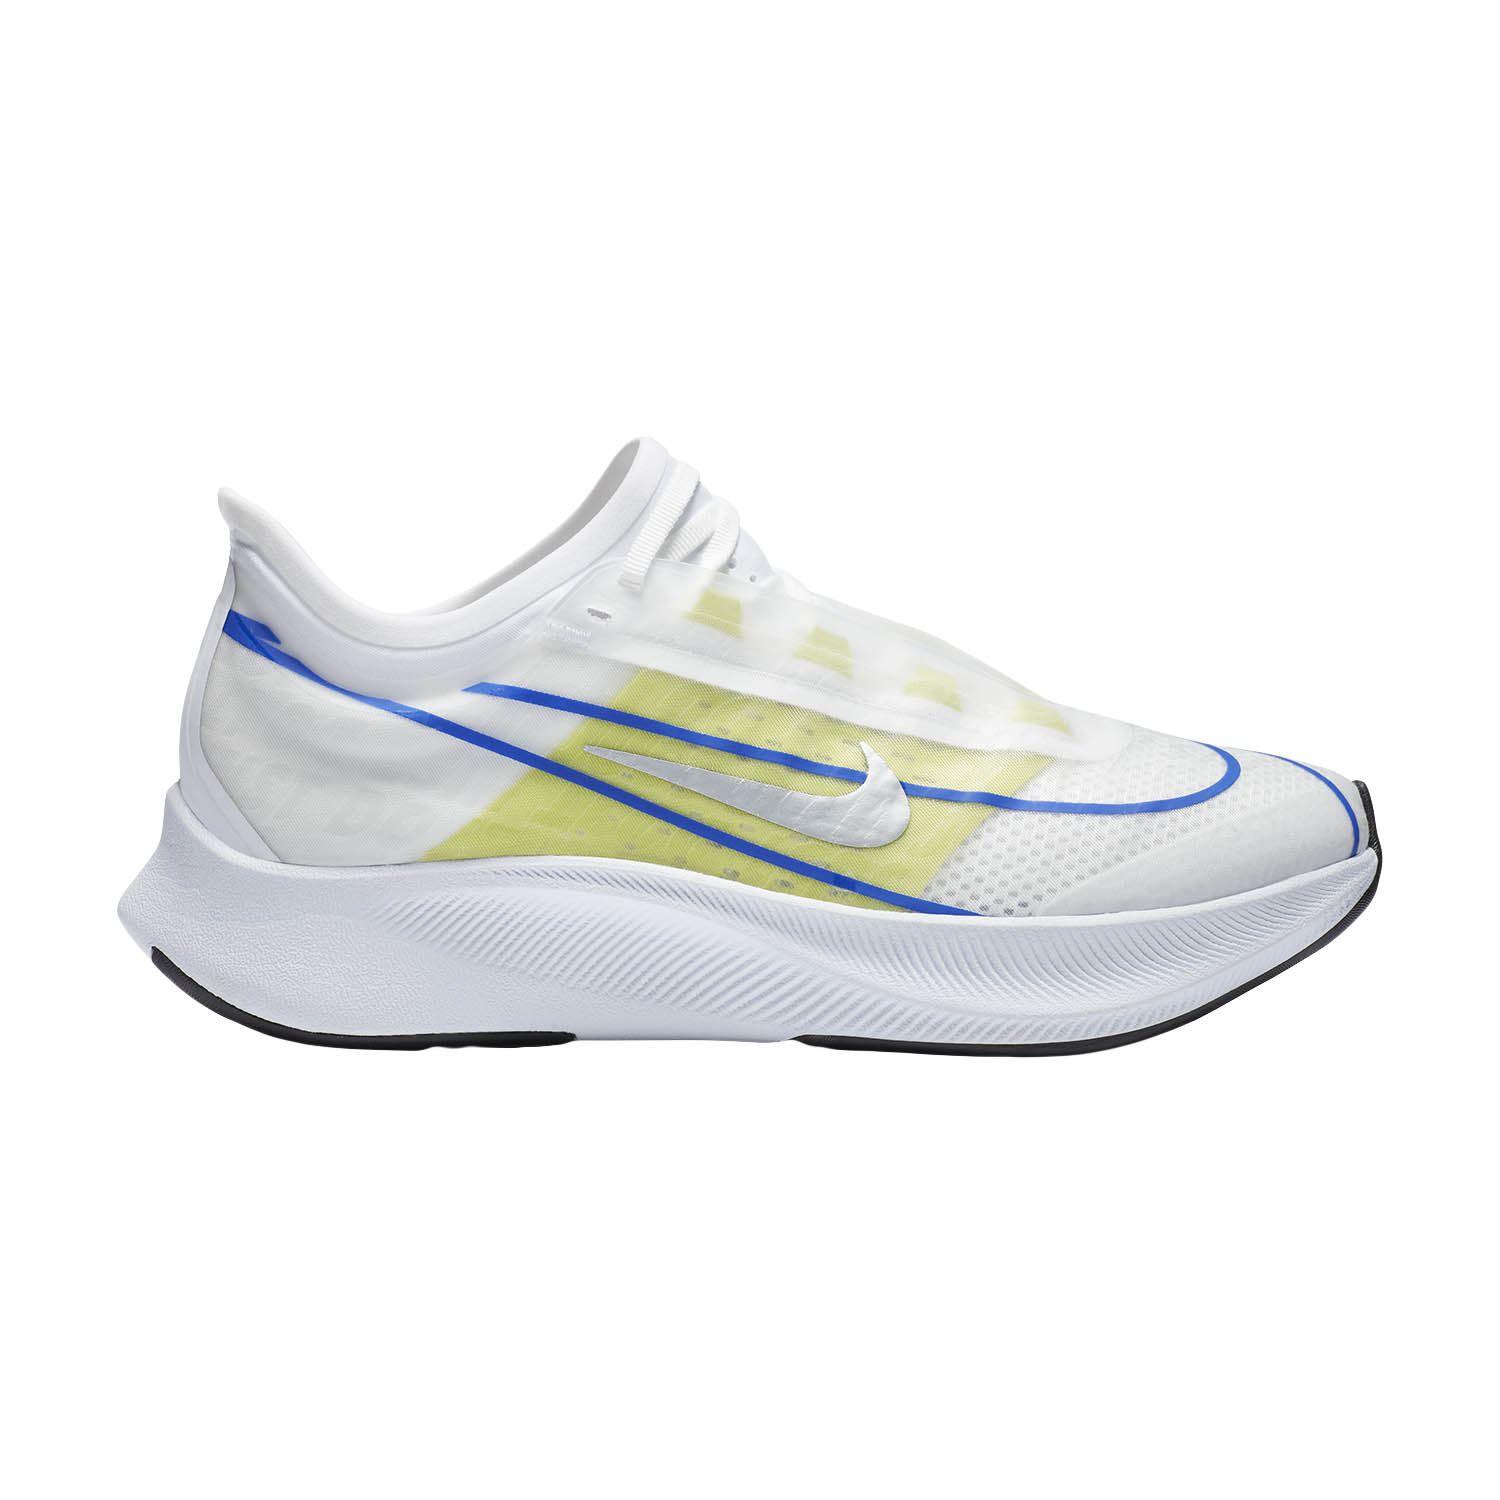 Nike Zoom Fly 3 Women's Running Shoes 